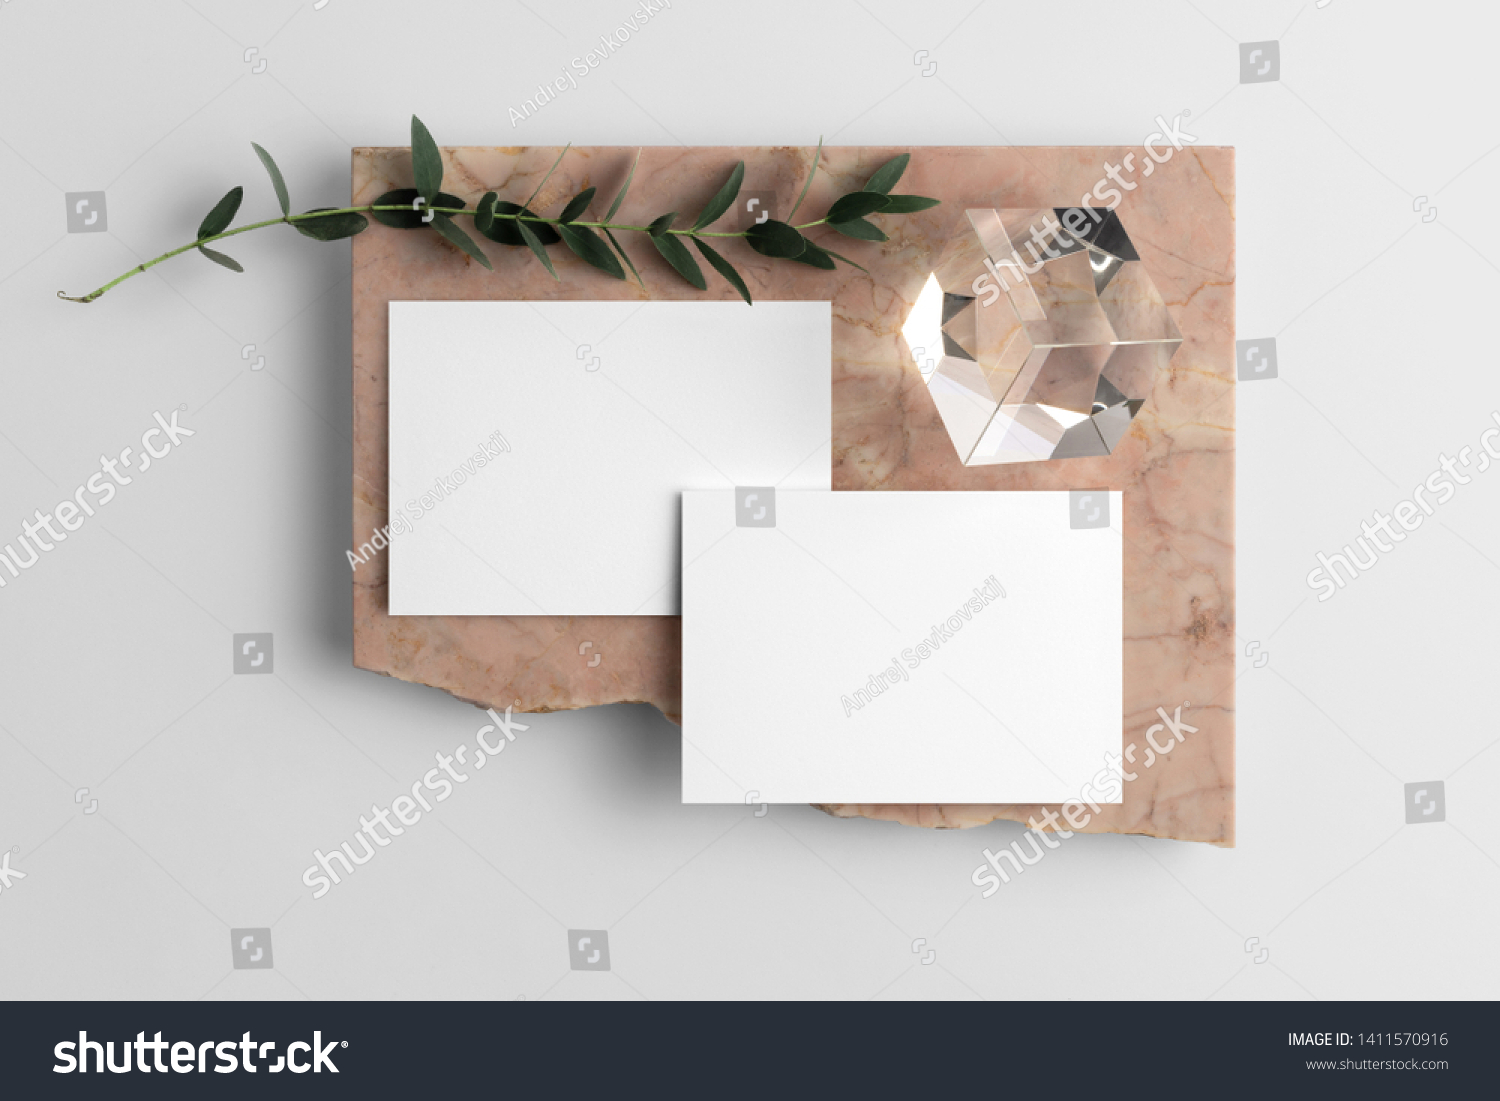 Real photo, business cards branding mockup template, isolated on light grey background, with marble and floral elements to place your design. #1411570916